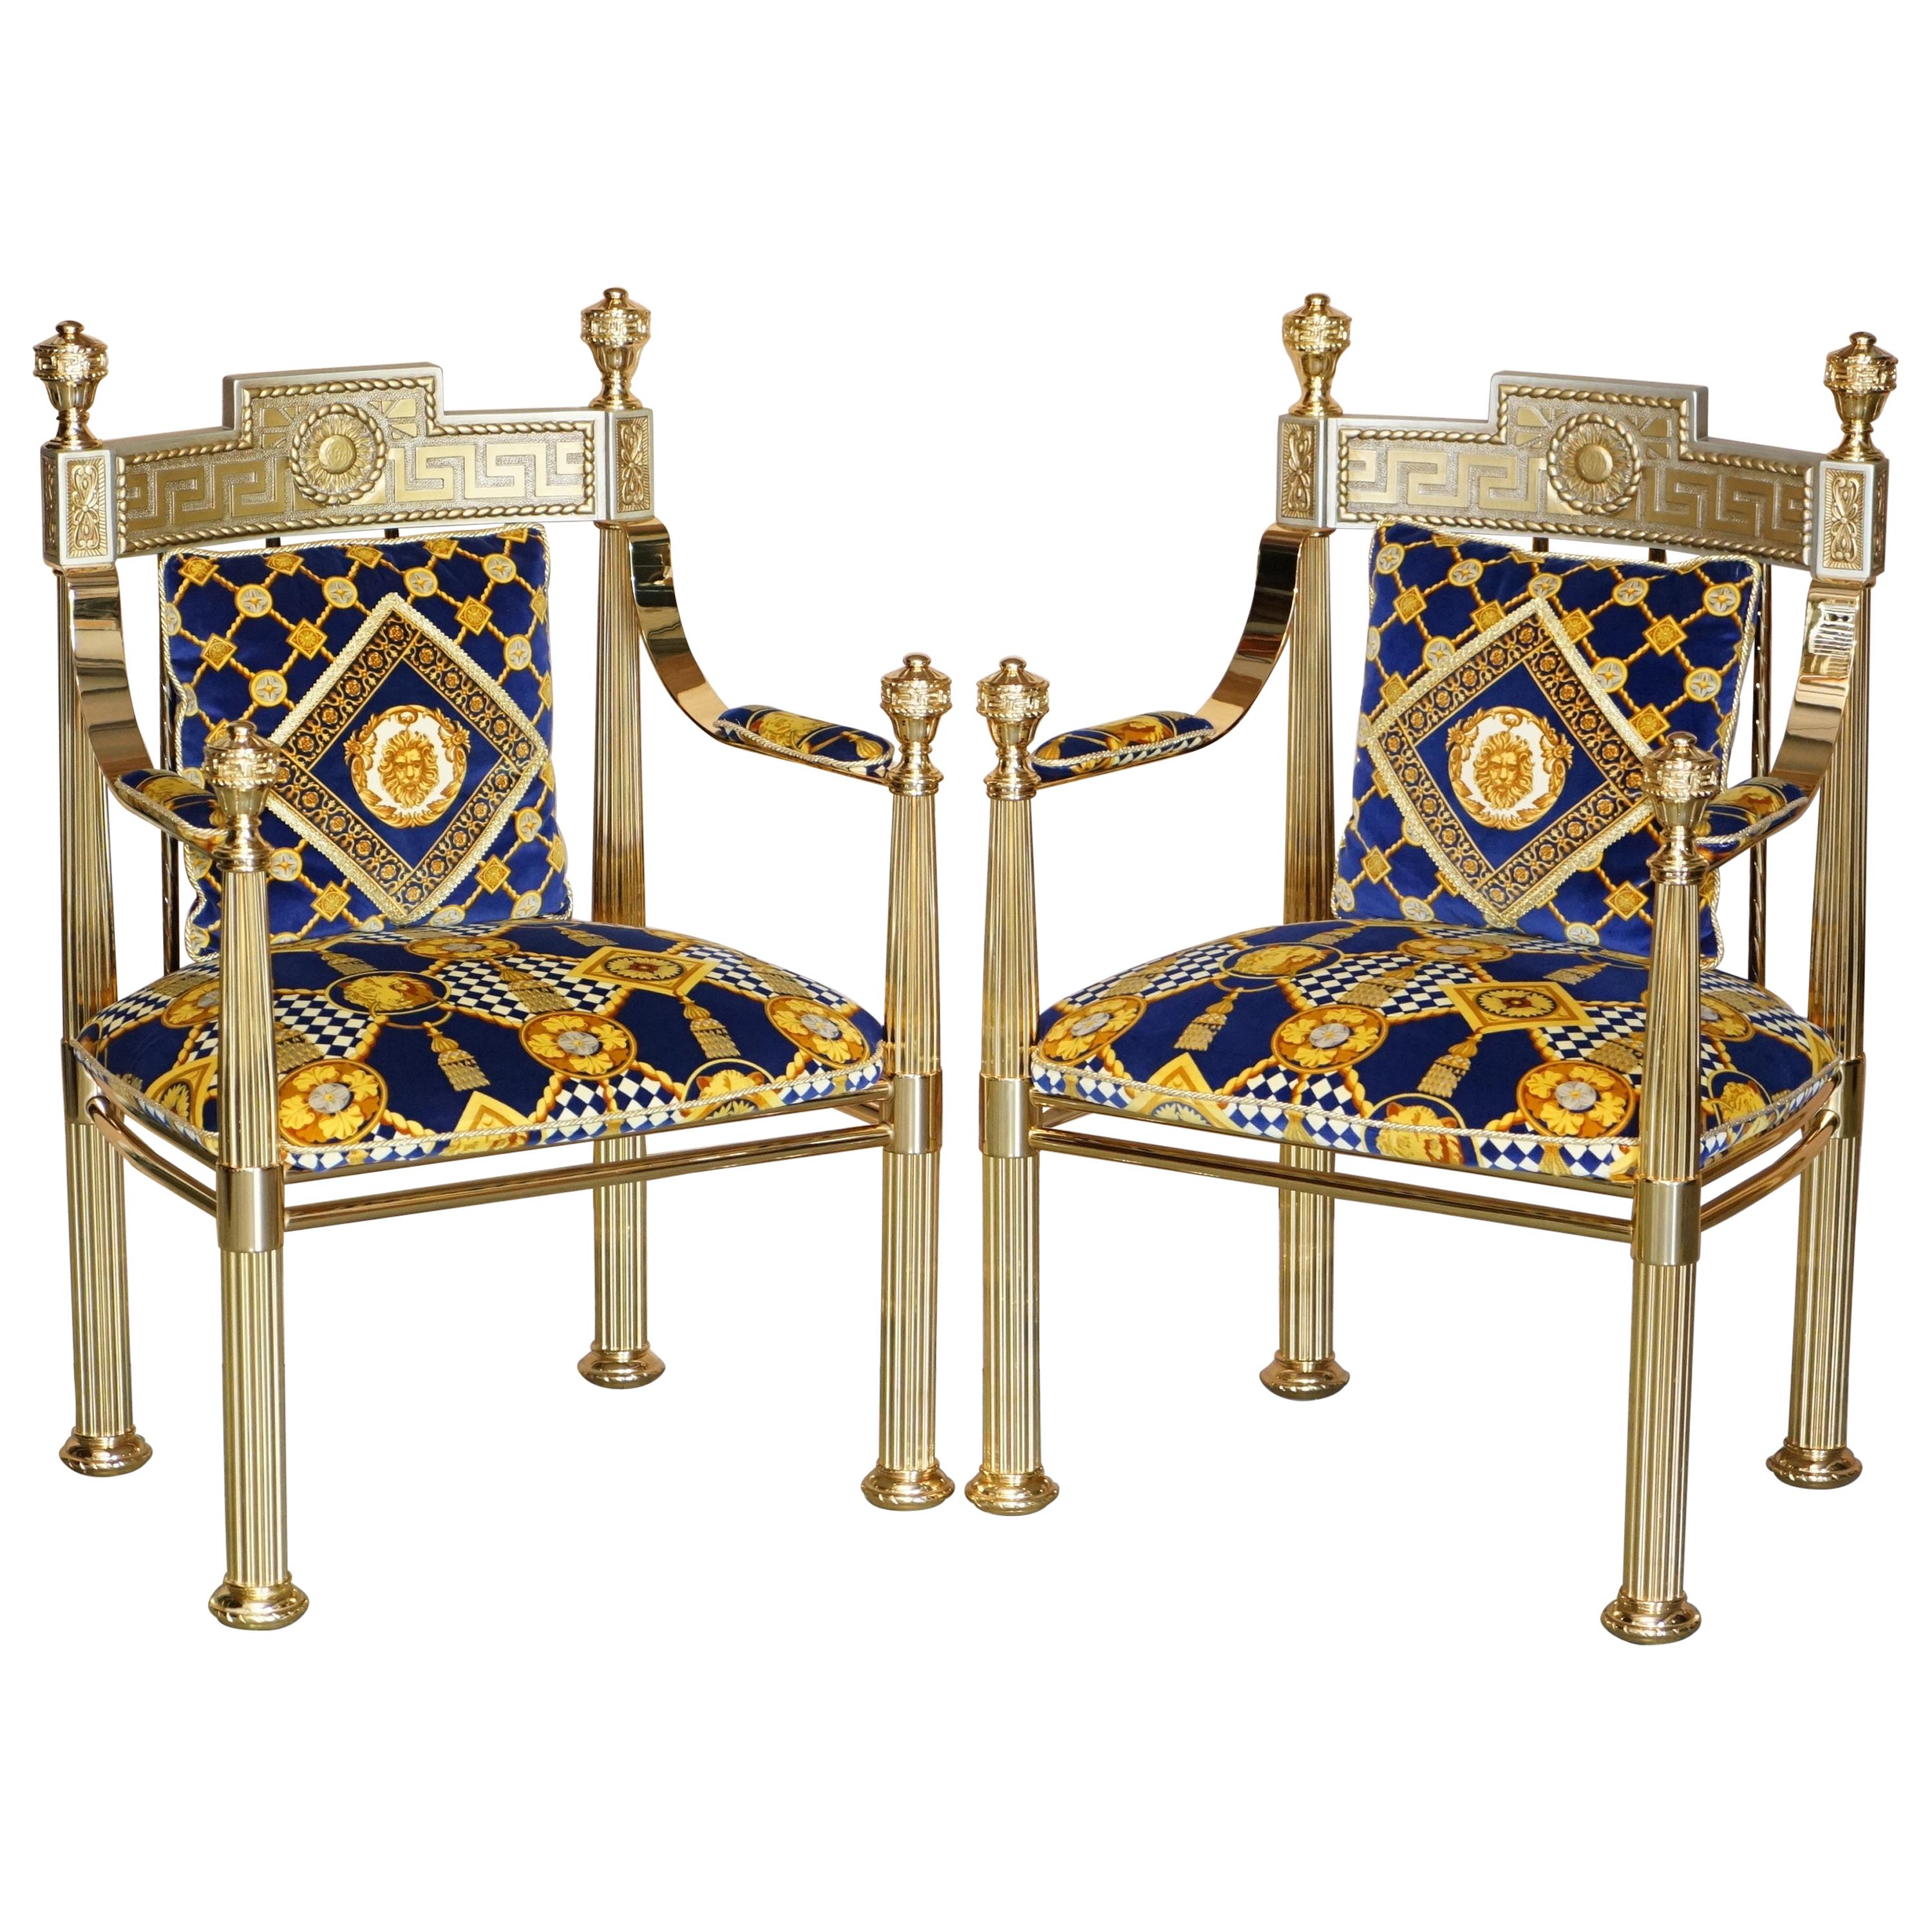 Pair of Large Gianni Versace Hollywood Regency Brass Framed Throne Armchairs